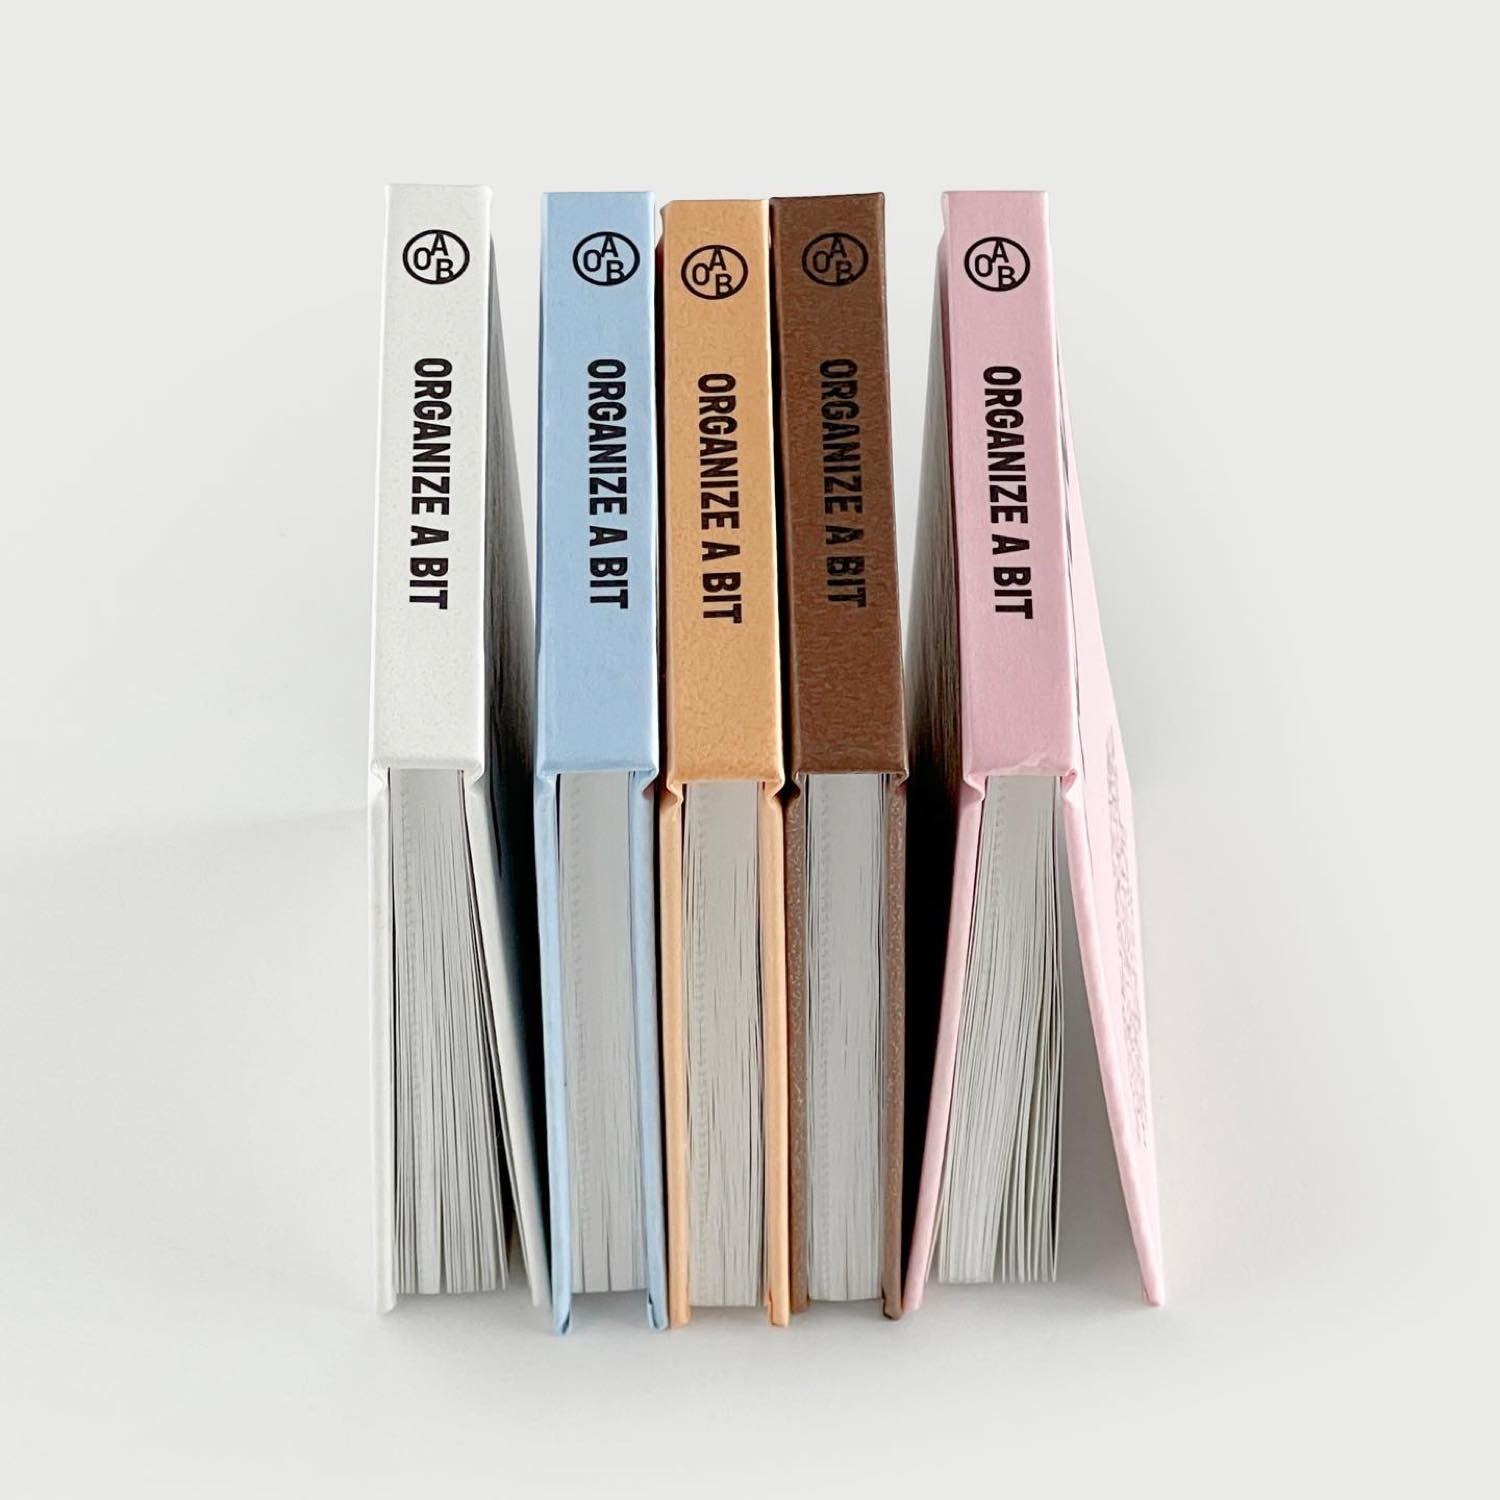 oab now diary / hard cover handy scheduler